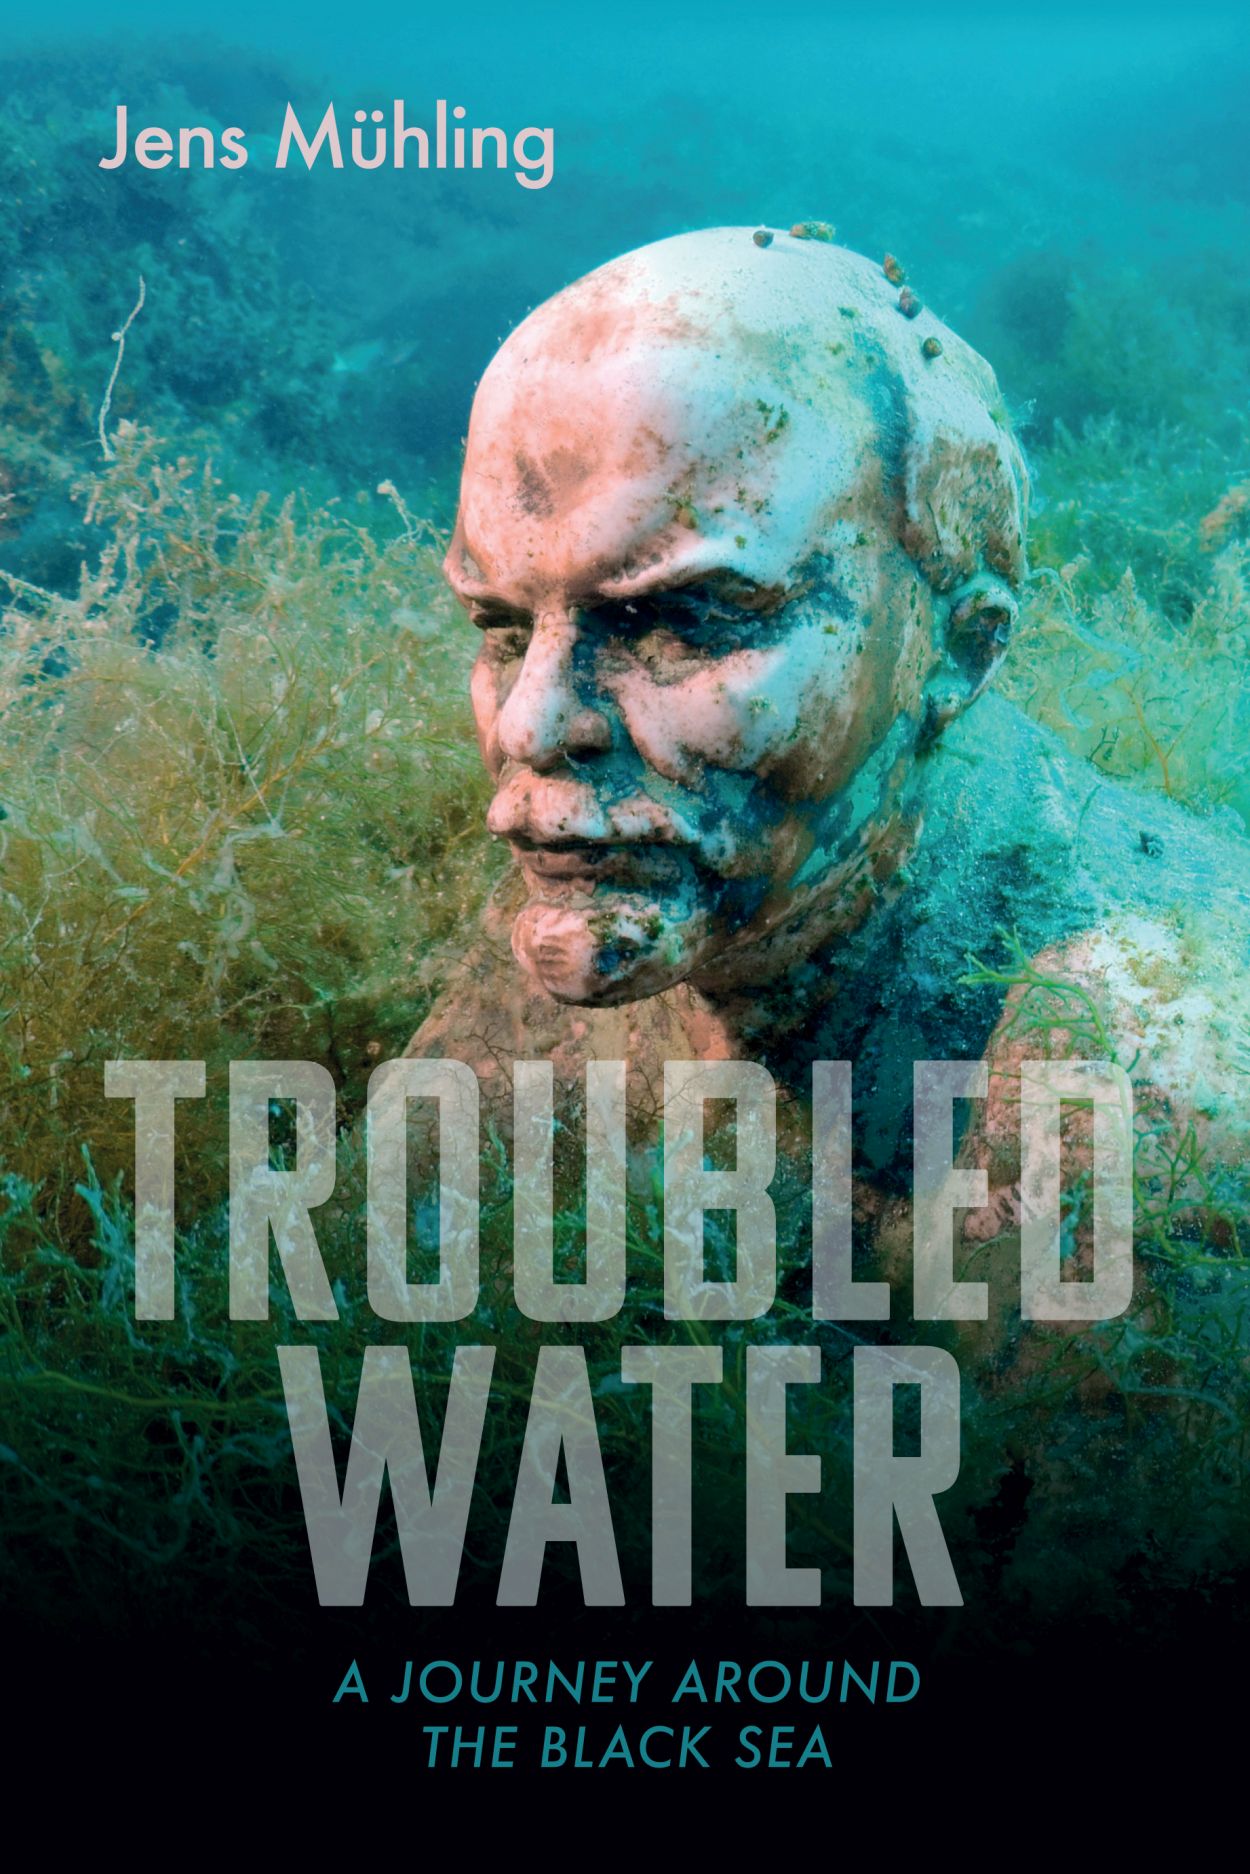 Troubled Water: A Journey Around the Black Sea, Mühling, Pare